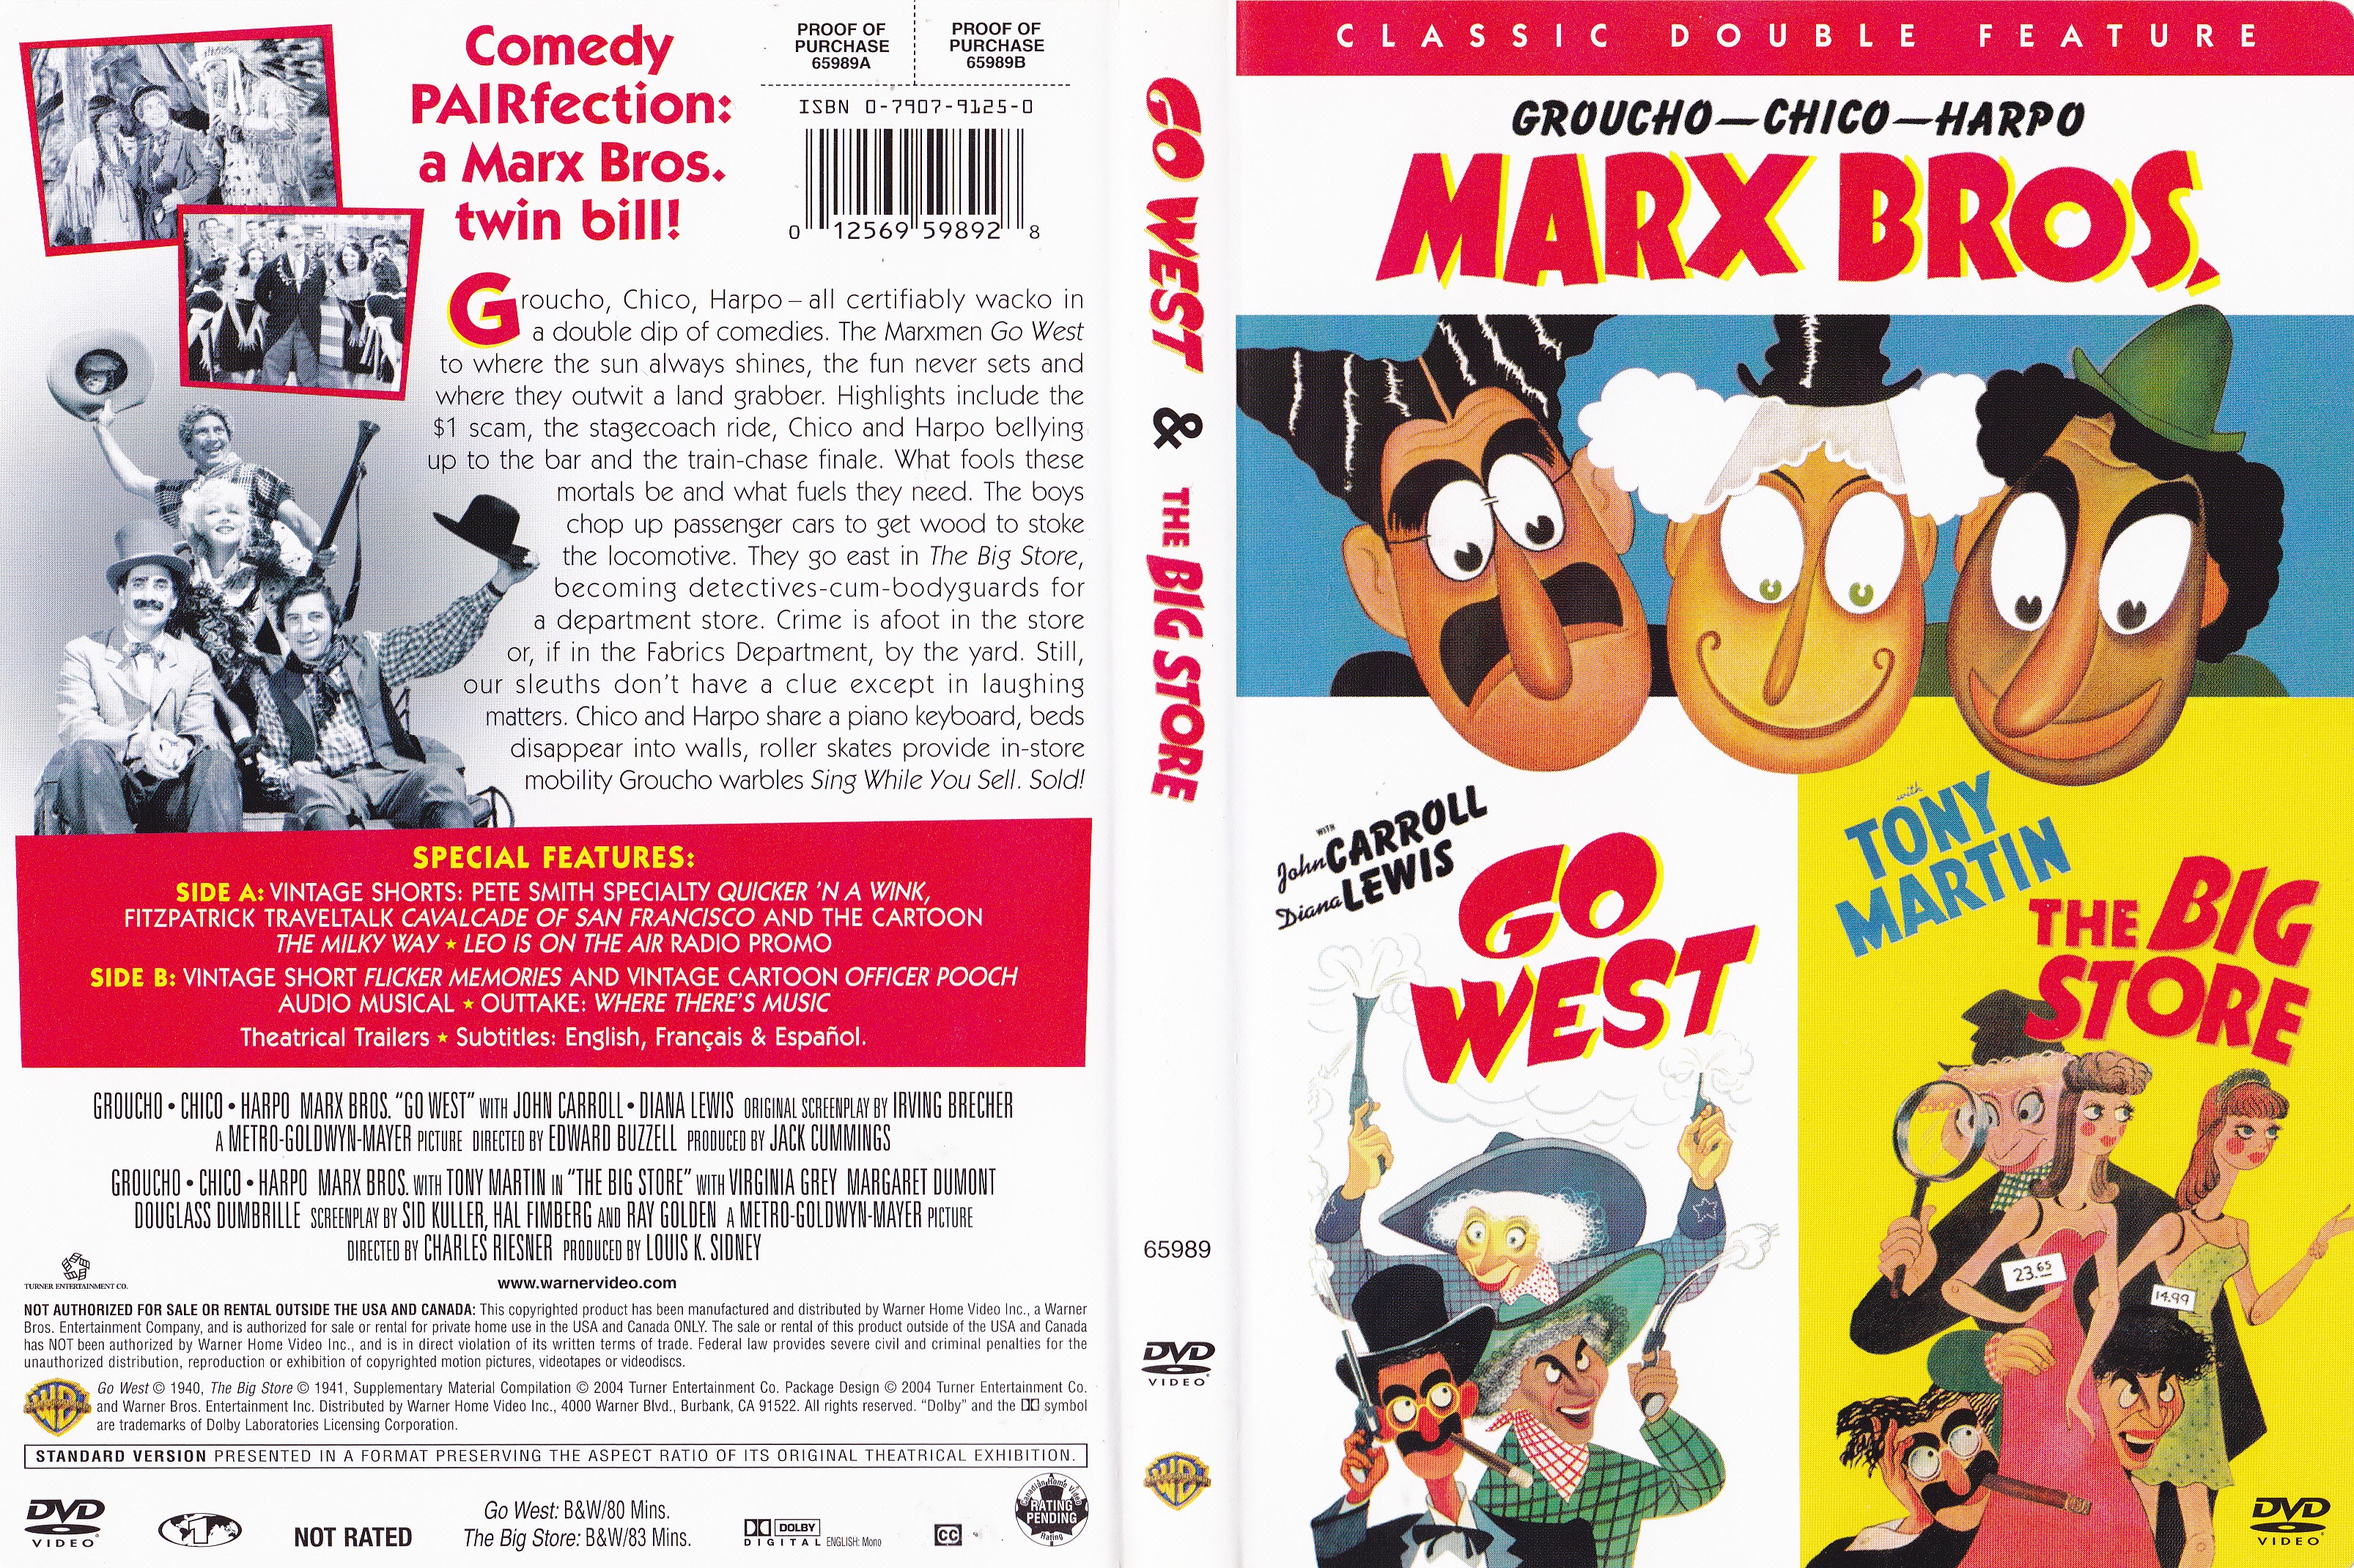 Jaquette DVD The marx brothers - Go west + The big store (Canadienne)